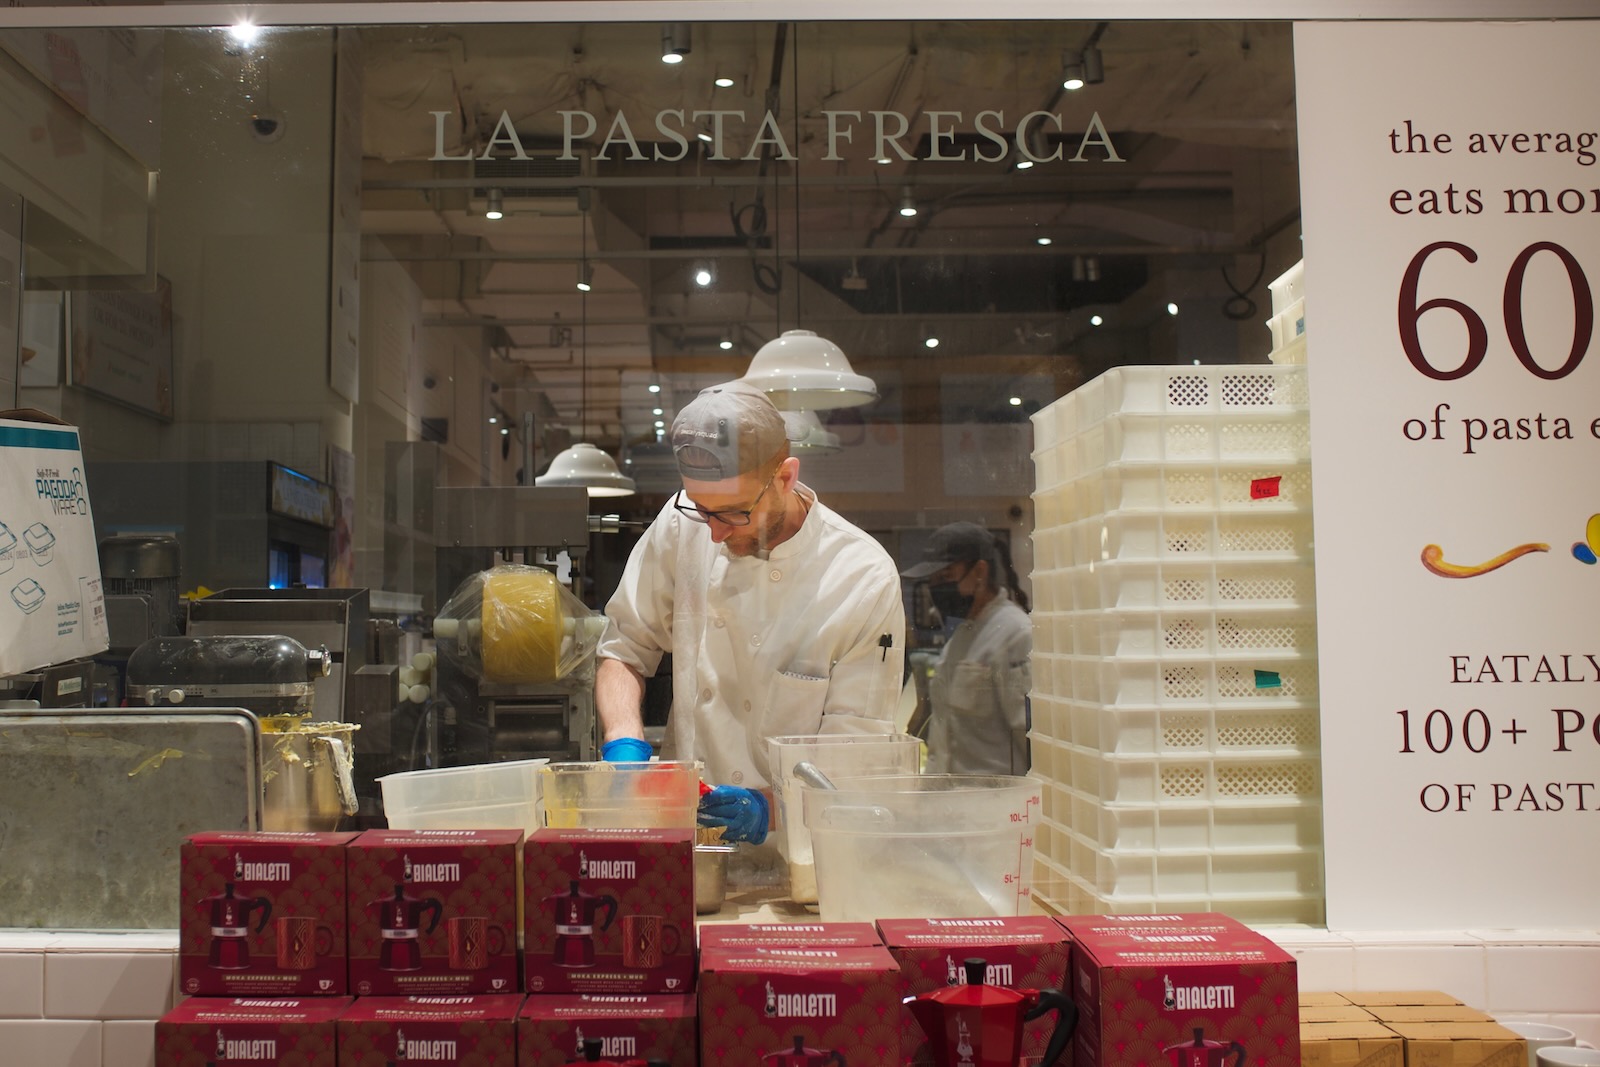 A man in a gray baseball cap and glasses prepares homemade pasta behind a glass partition.